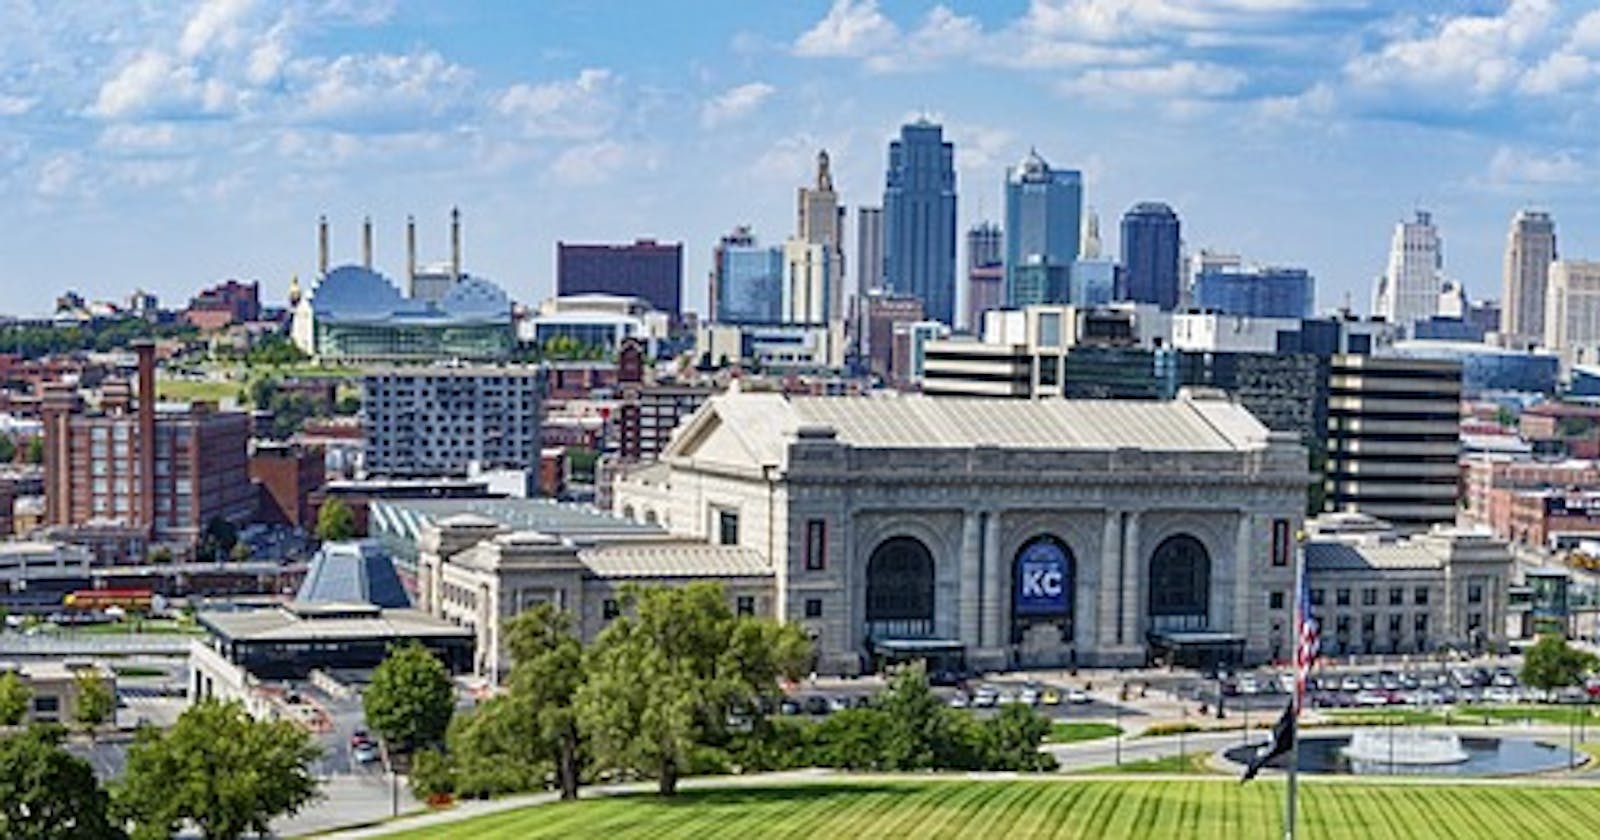 Food and Drink Tours in Kansas City